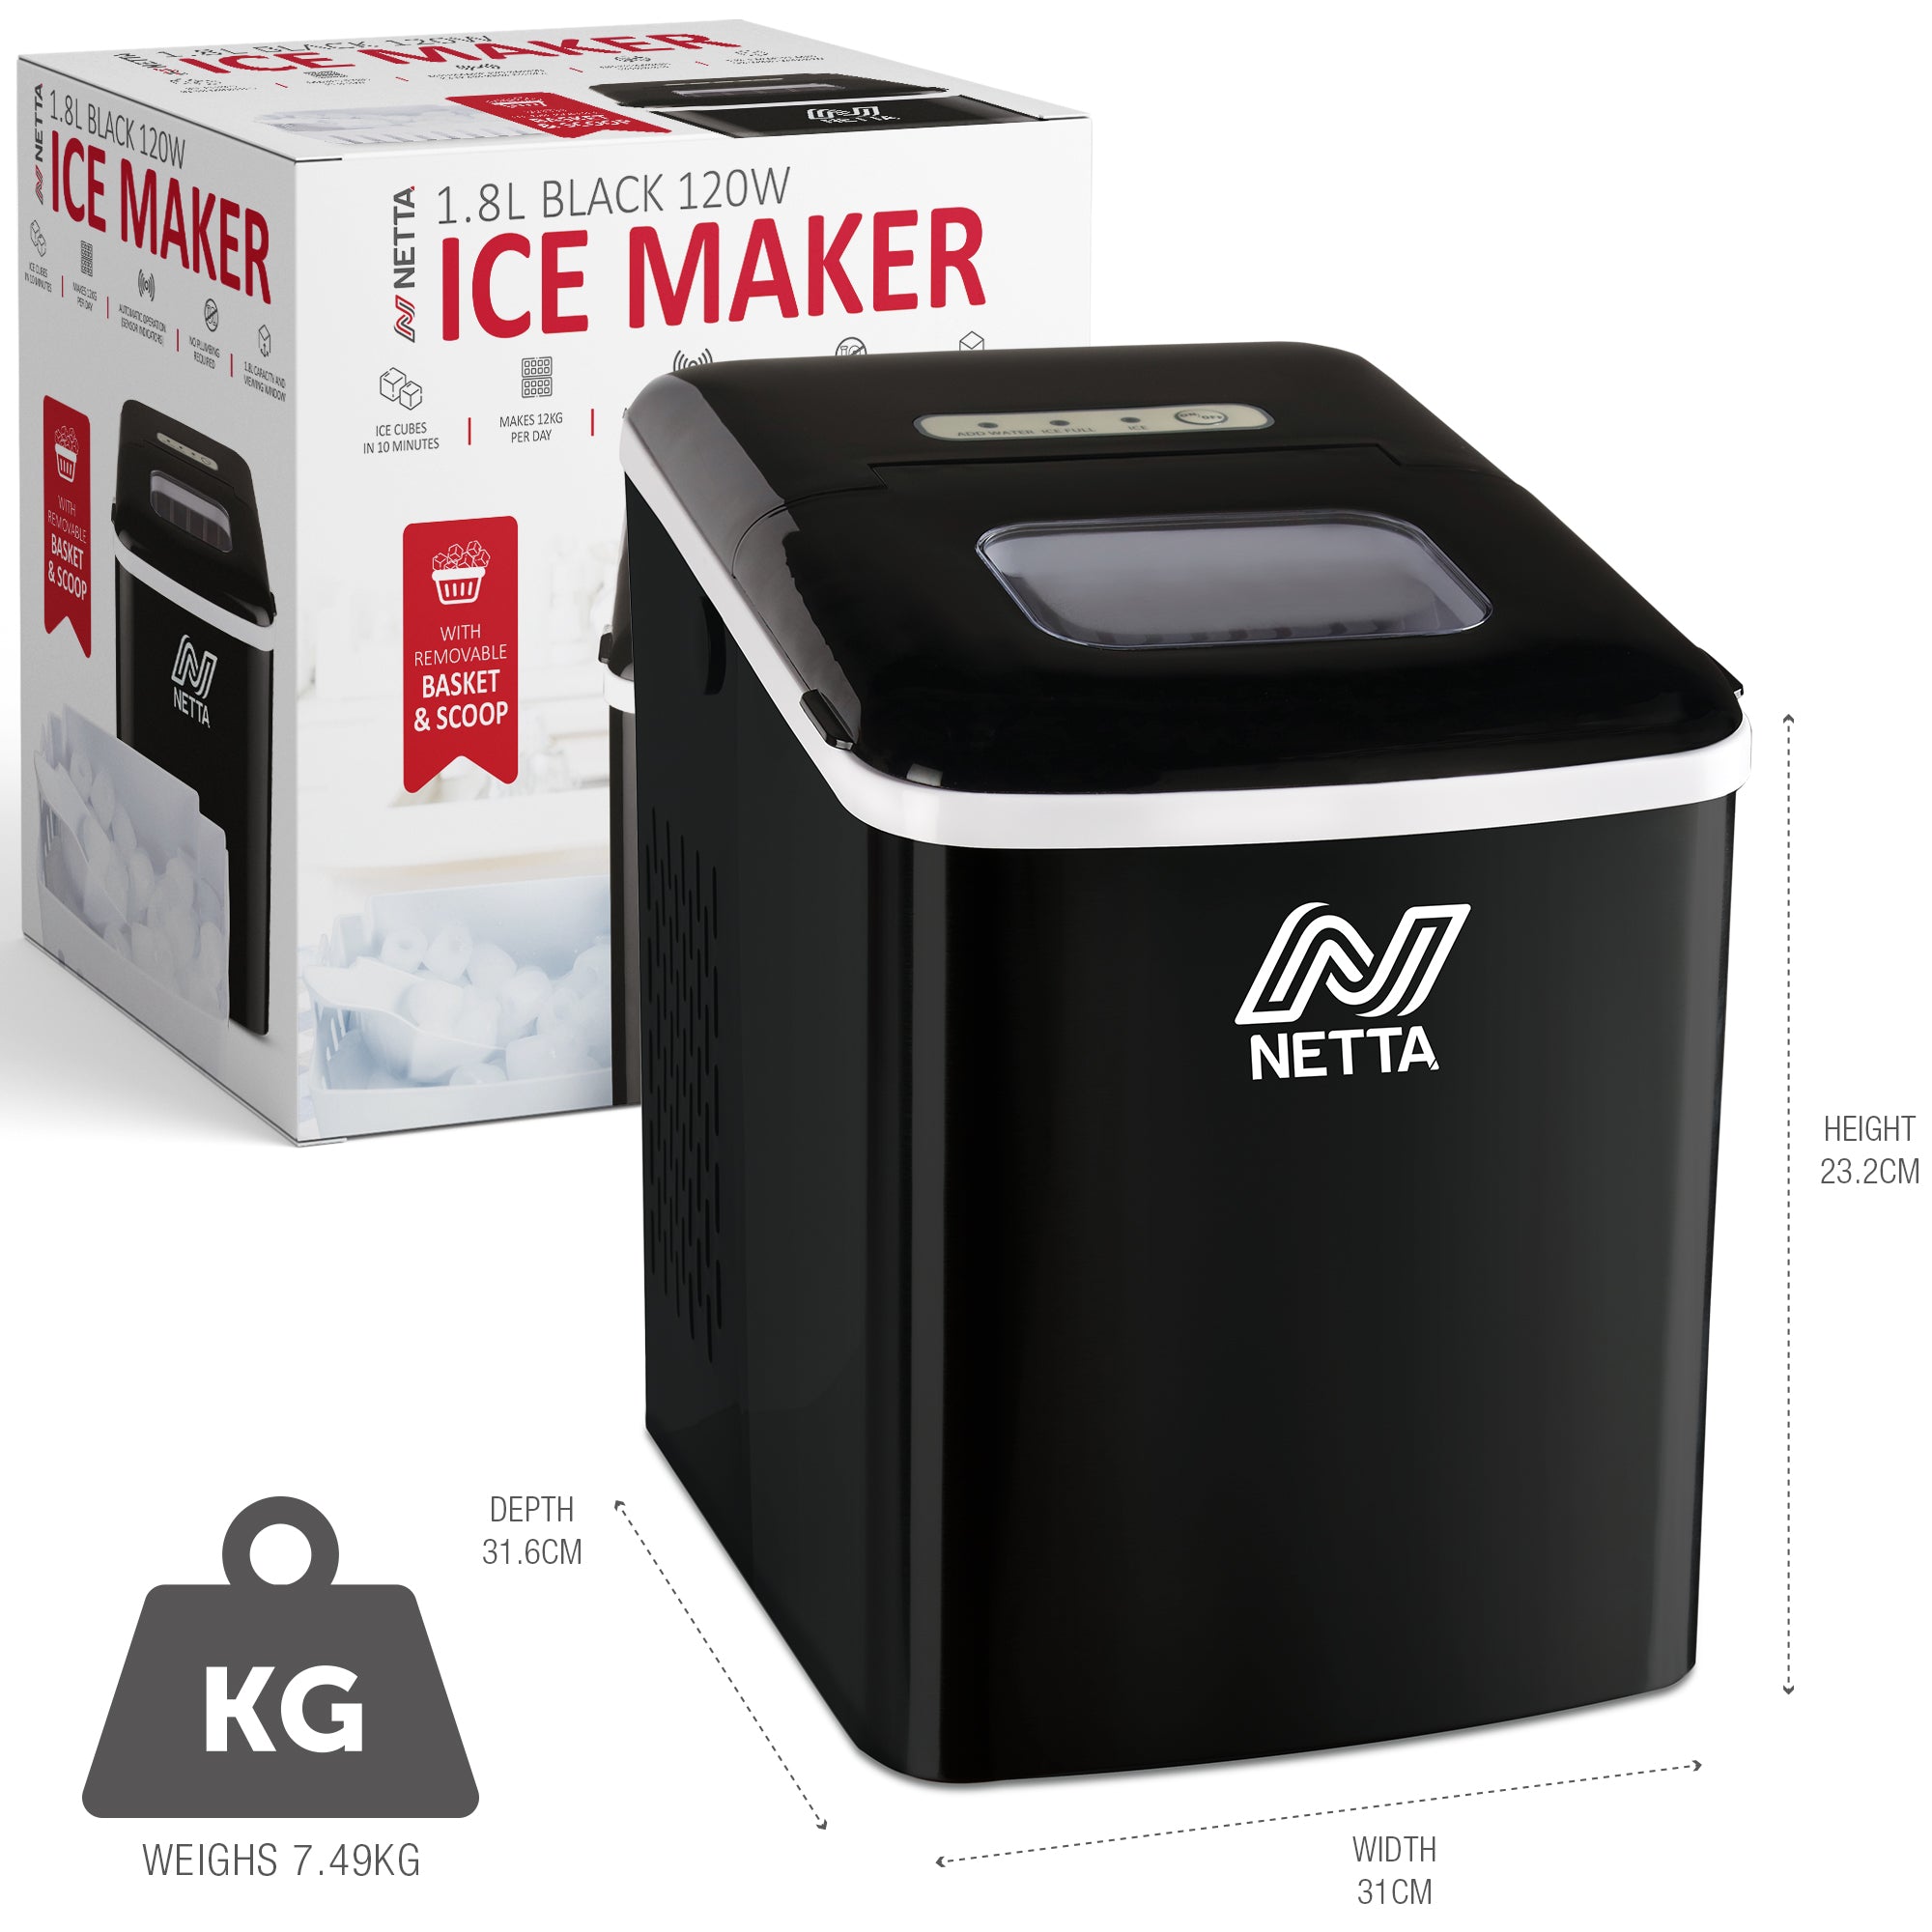 NETTA Ice Maker Machine with 1.8L Tank - Makes 12KG of Ice per Day - Black